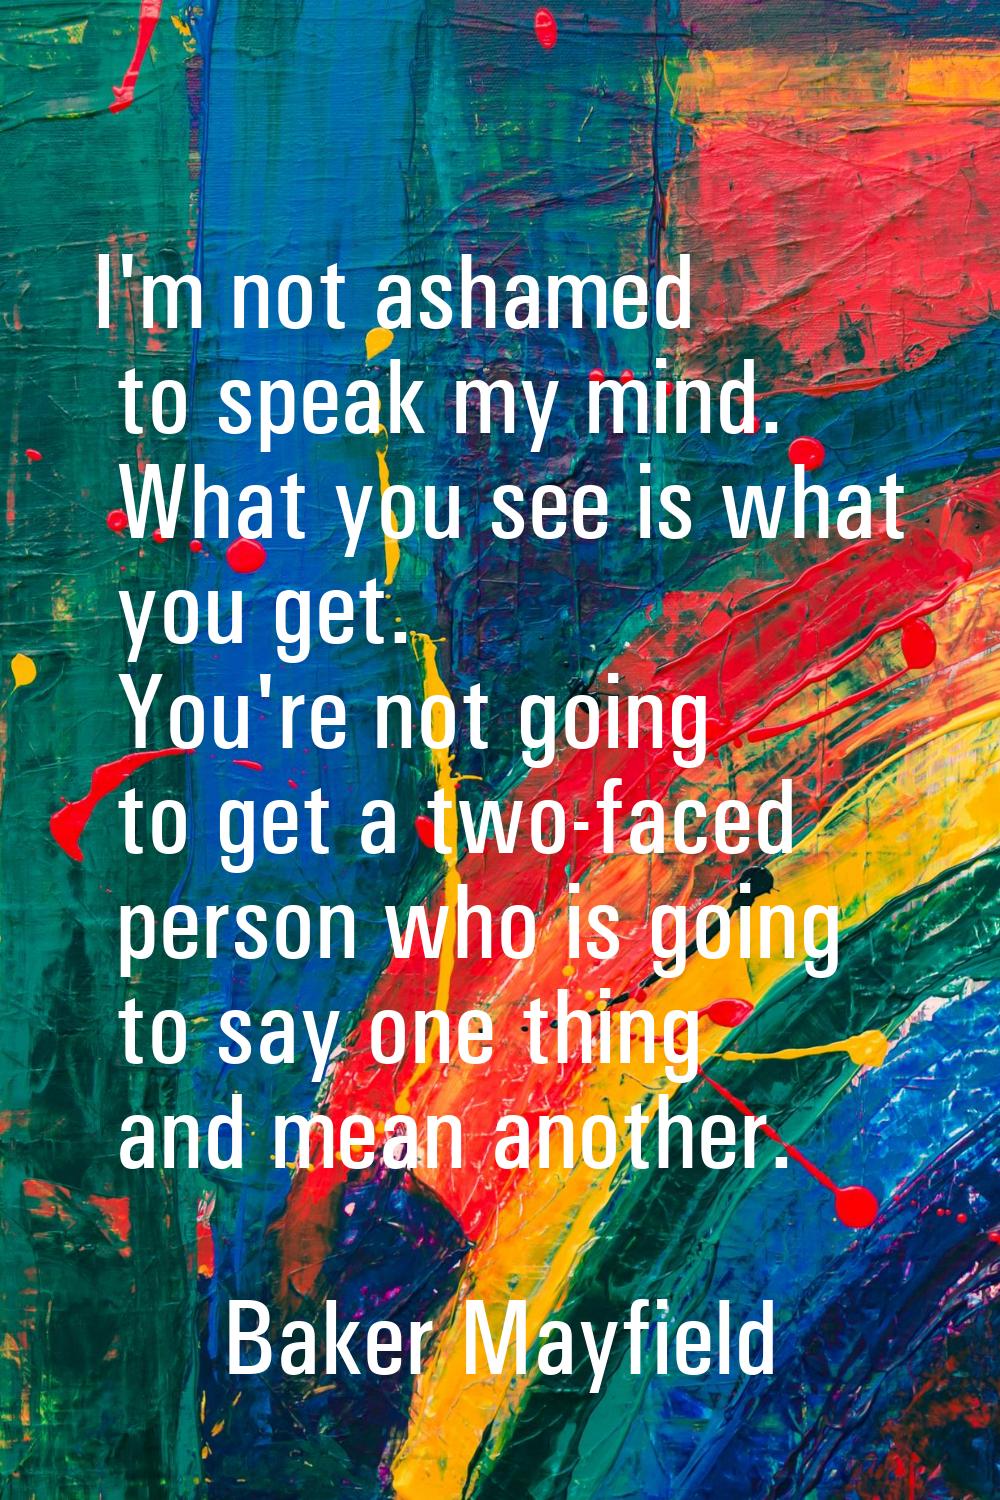 I'm not ashamed to speak my mind. What you see is what you get. You're not going to get a two-faced